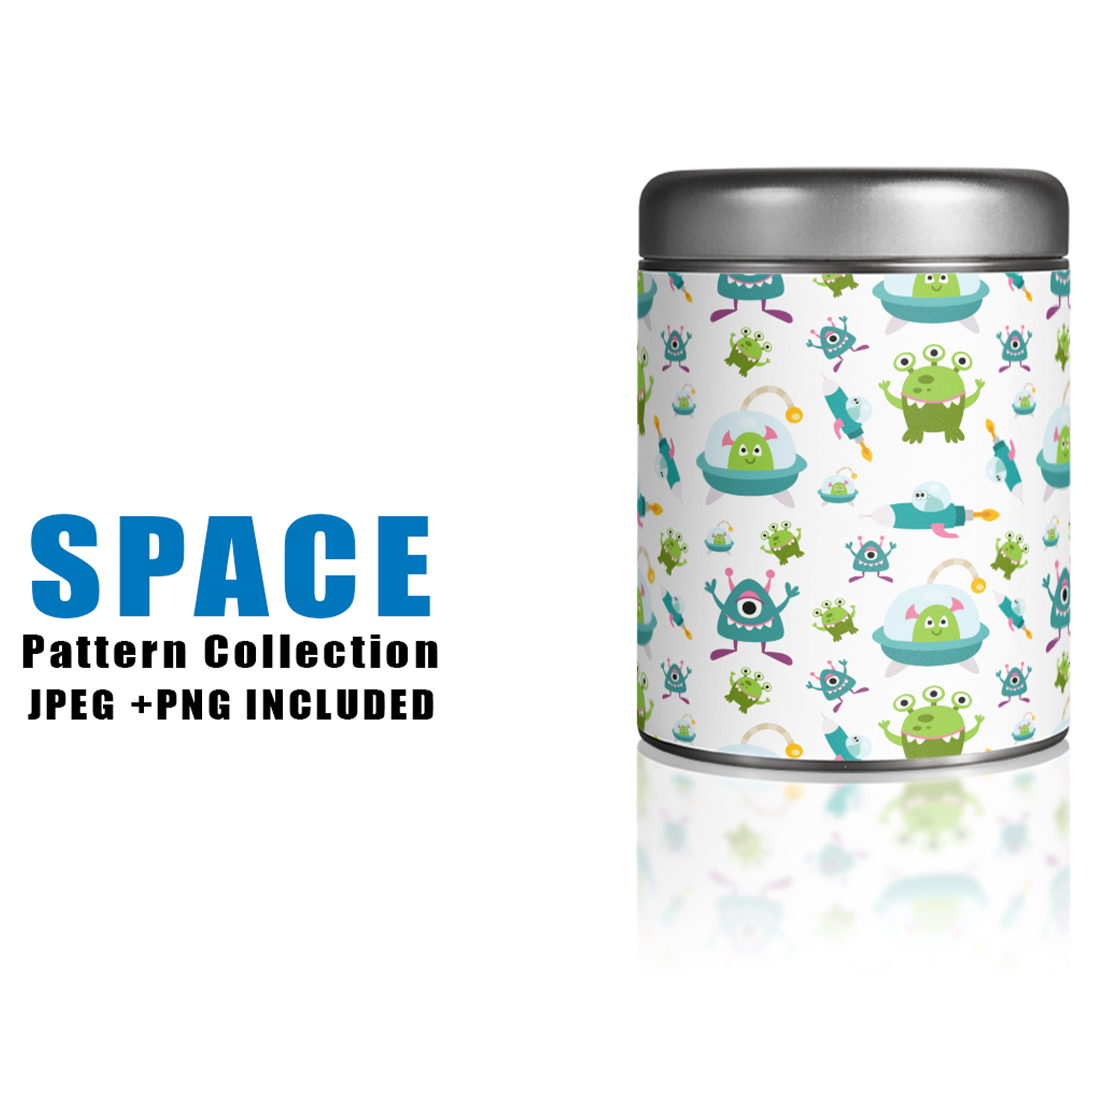 Image of a jar with elegant patterns on the theme of space